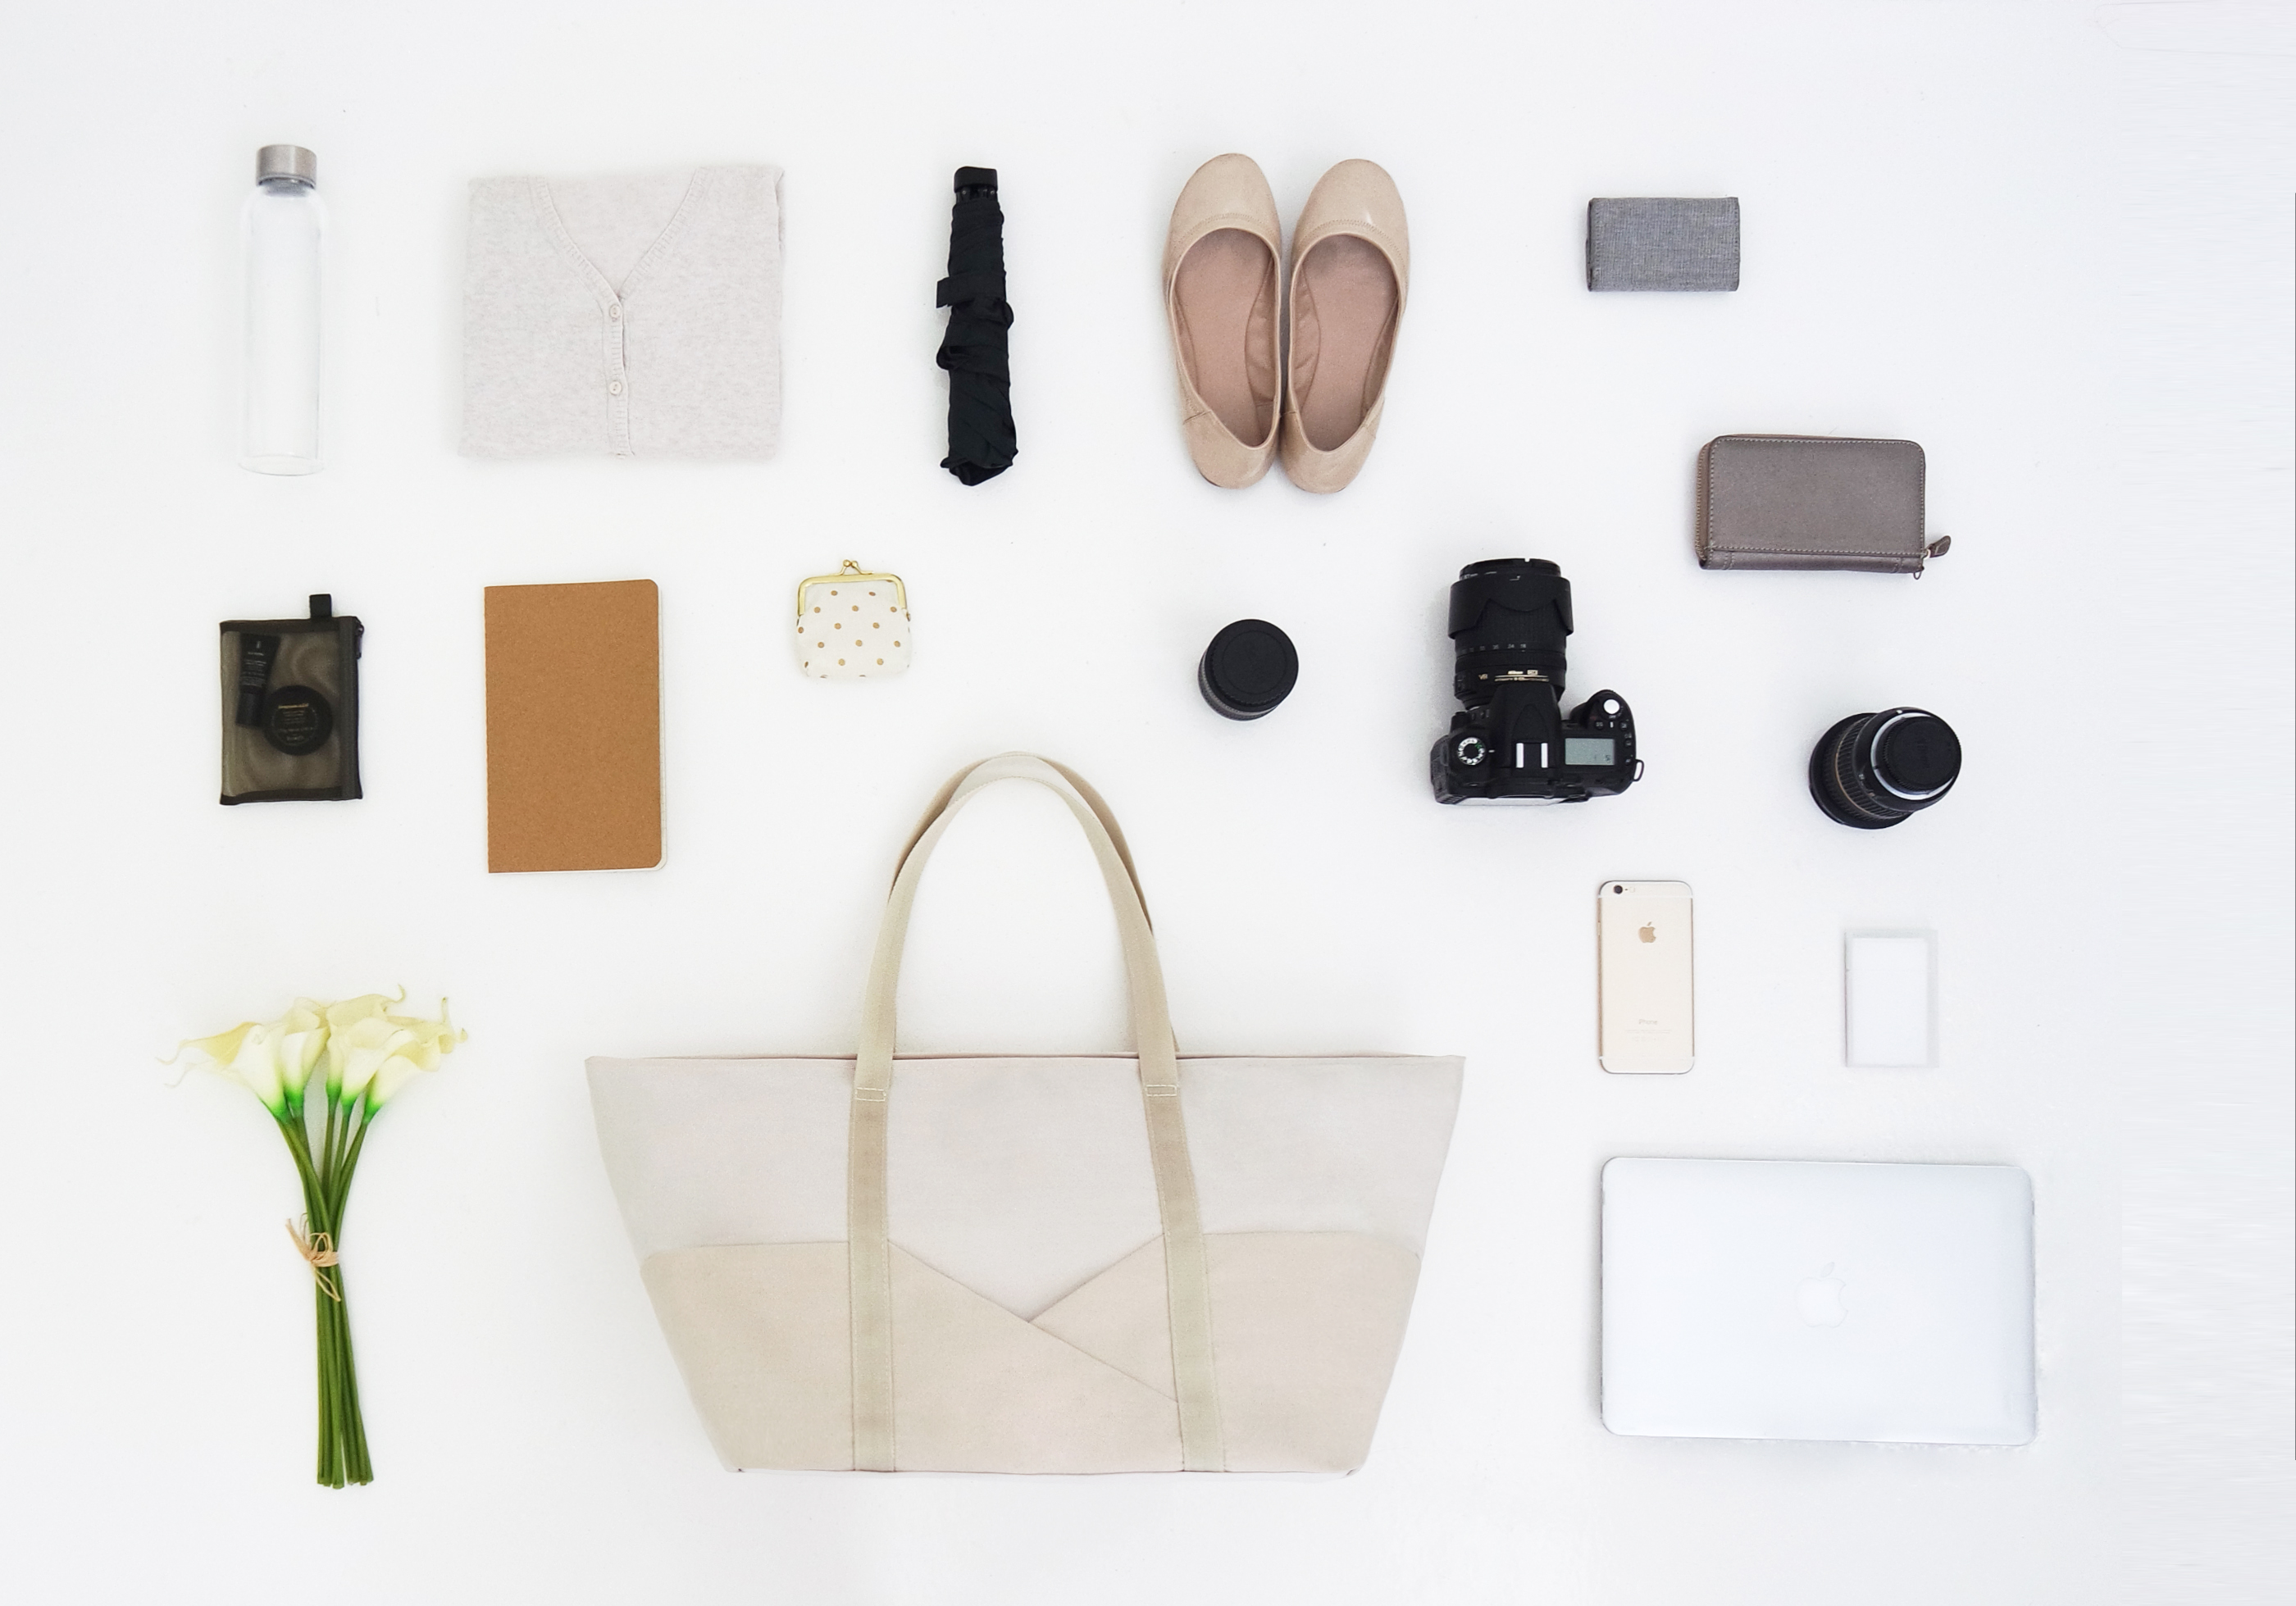 8 Must Have Photography Products for Mom Photographers + Aide de Camp Camera Bag Giveaway